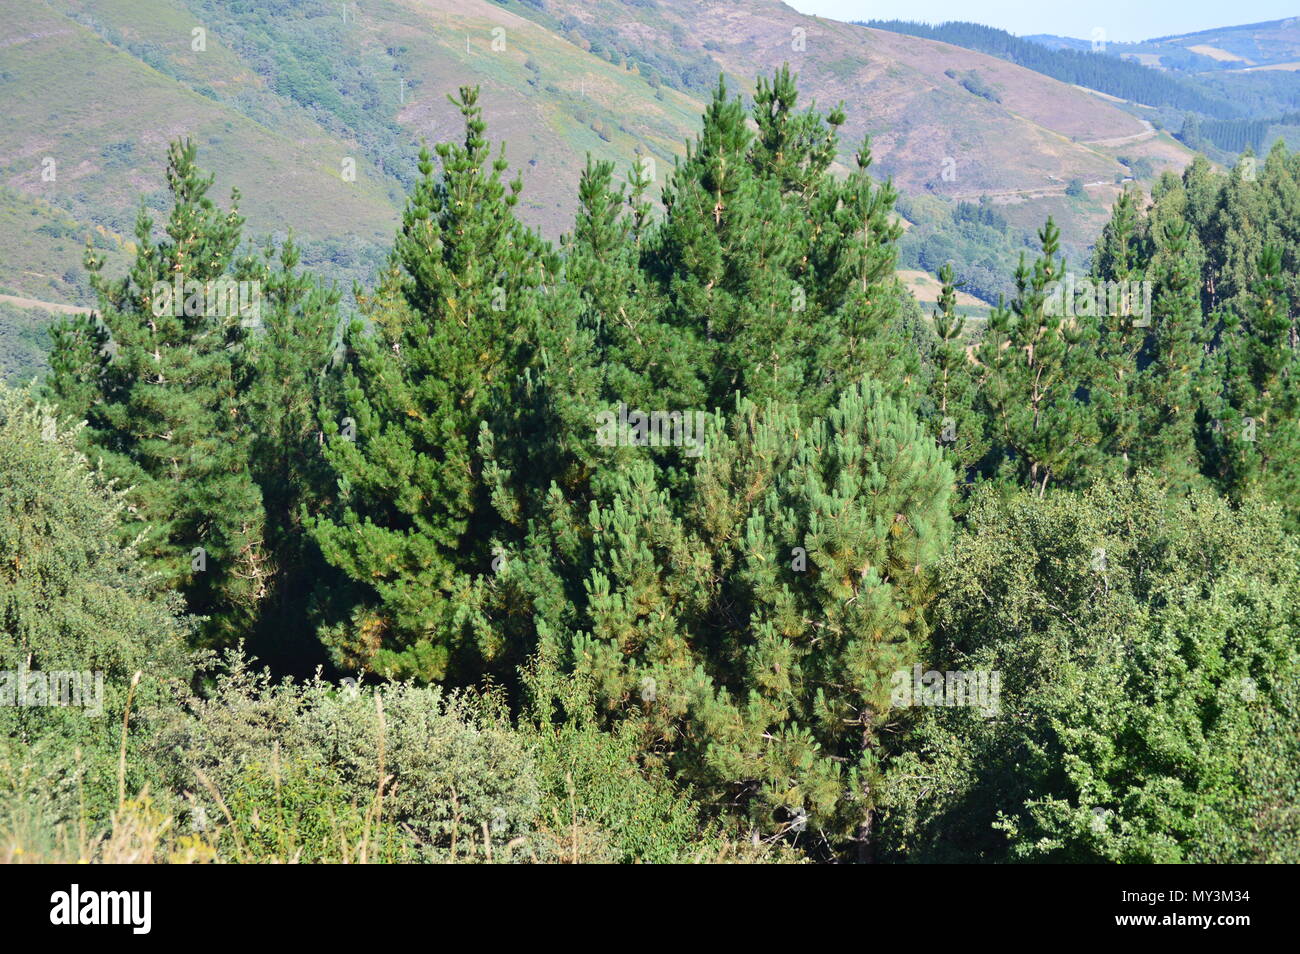 Leafy Forest Of Pines In The Mountains Of Galicia. Travel Landscape Botanic. 18 August 2016. Rebedul, Becerrea Lugo Galicia Spain. Stock Photo